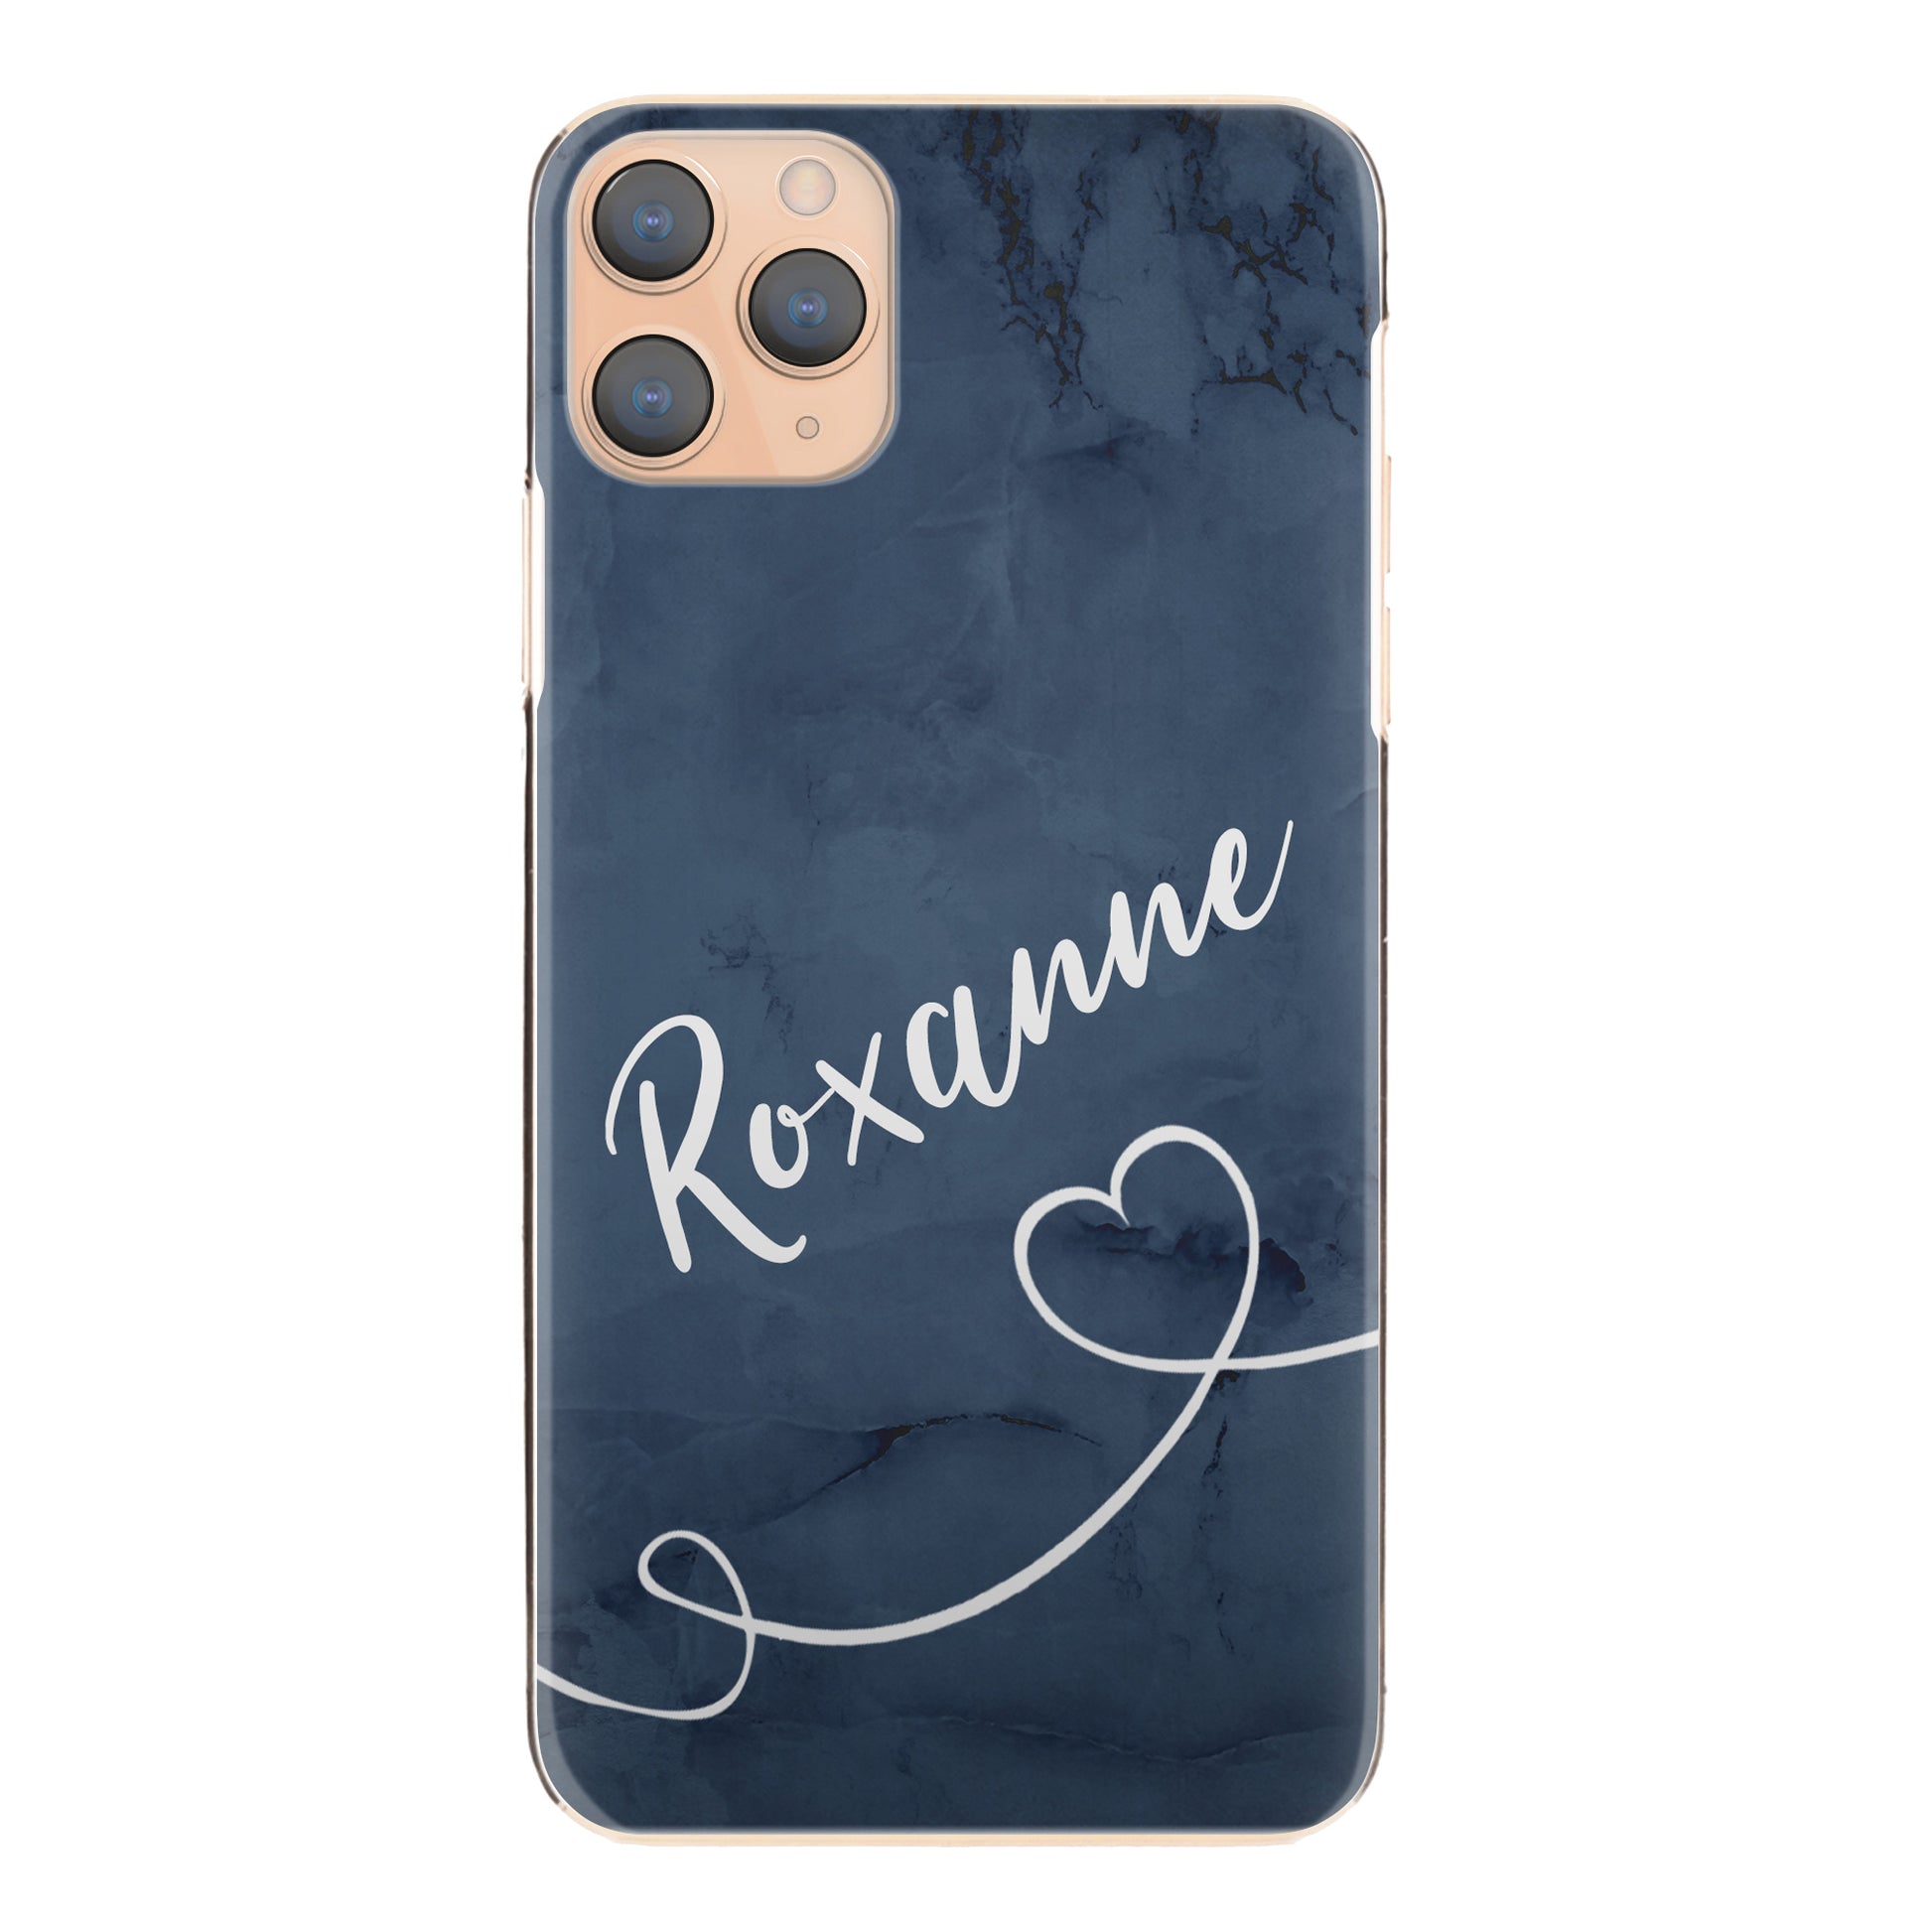 Personalised Huawei Phone Hard Case with Stylish Text and Heart Line on Blue Marble